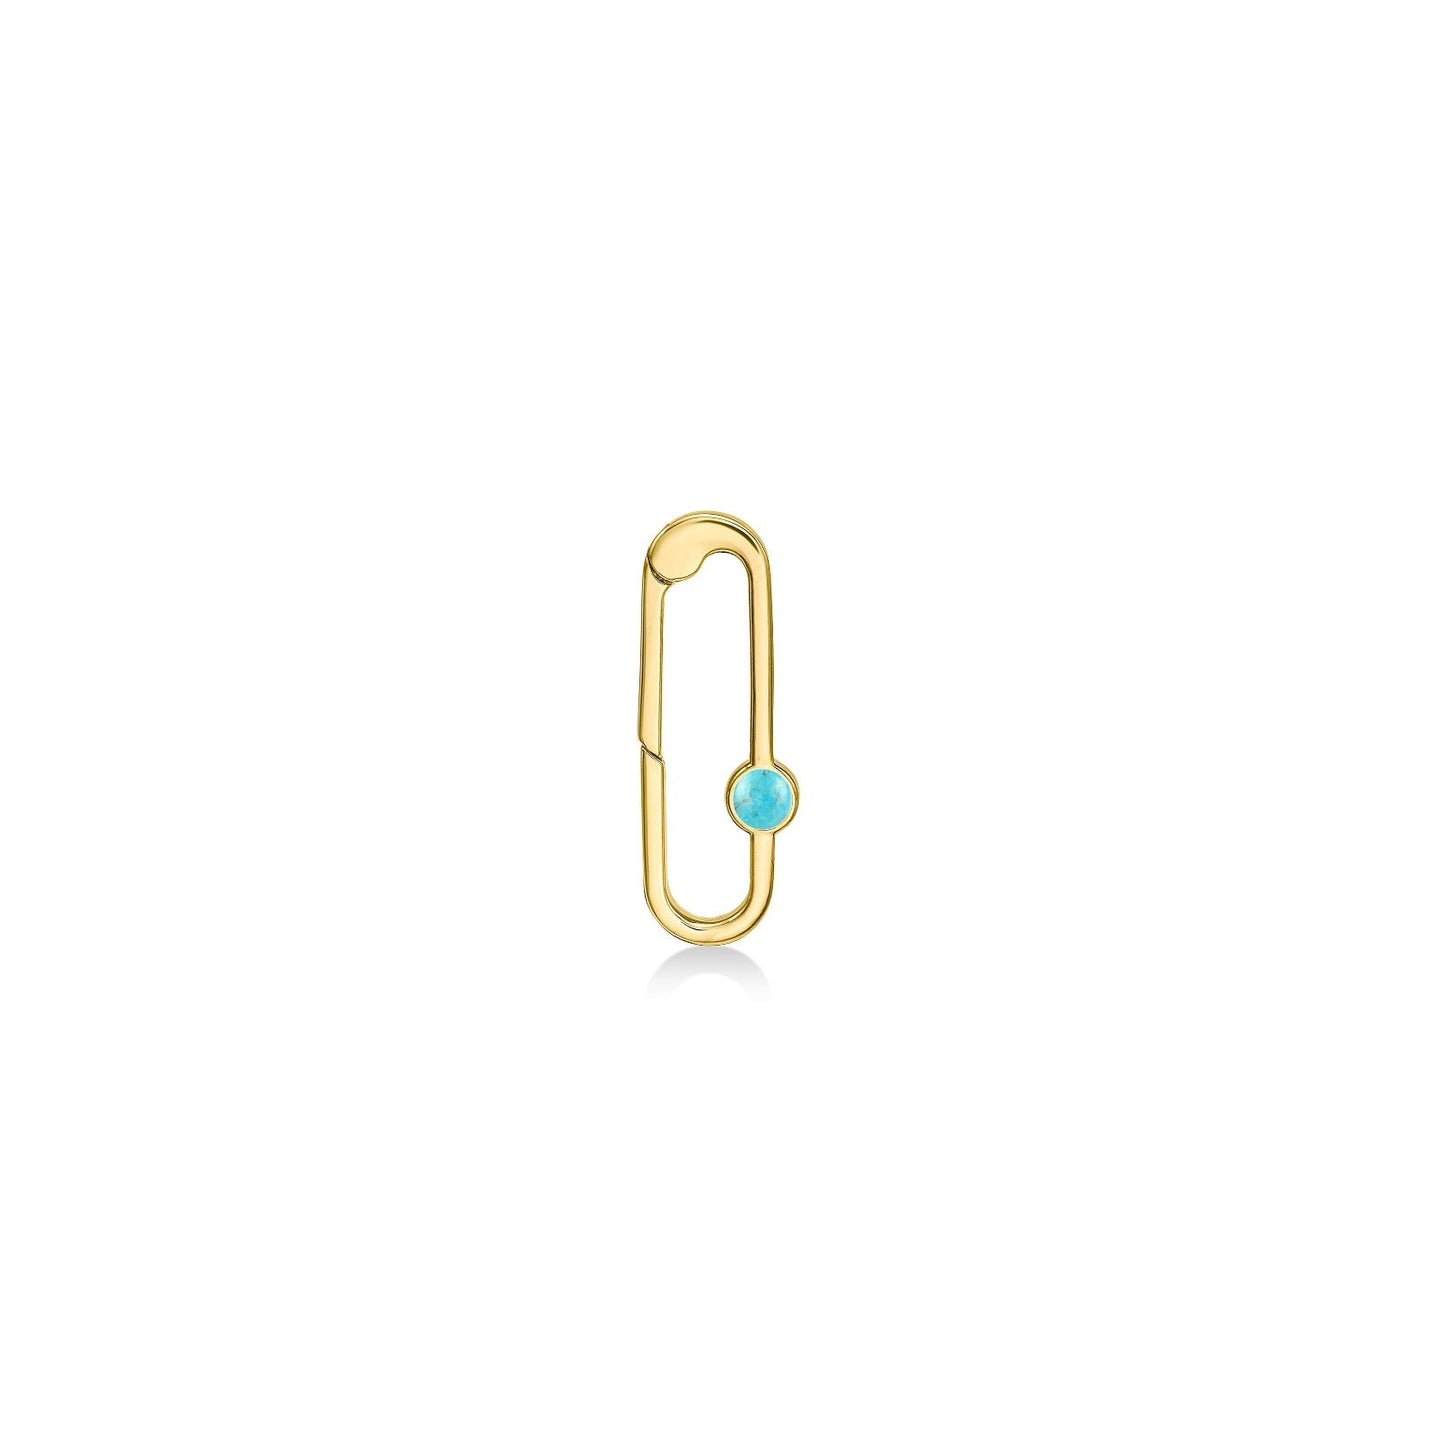 Paperclip charm lock with turquoise